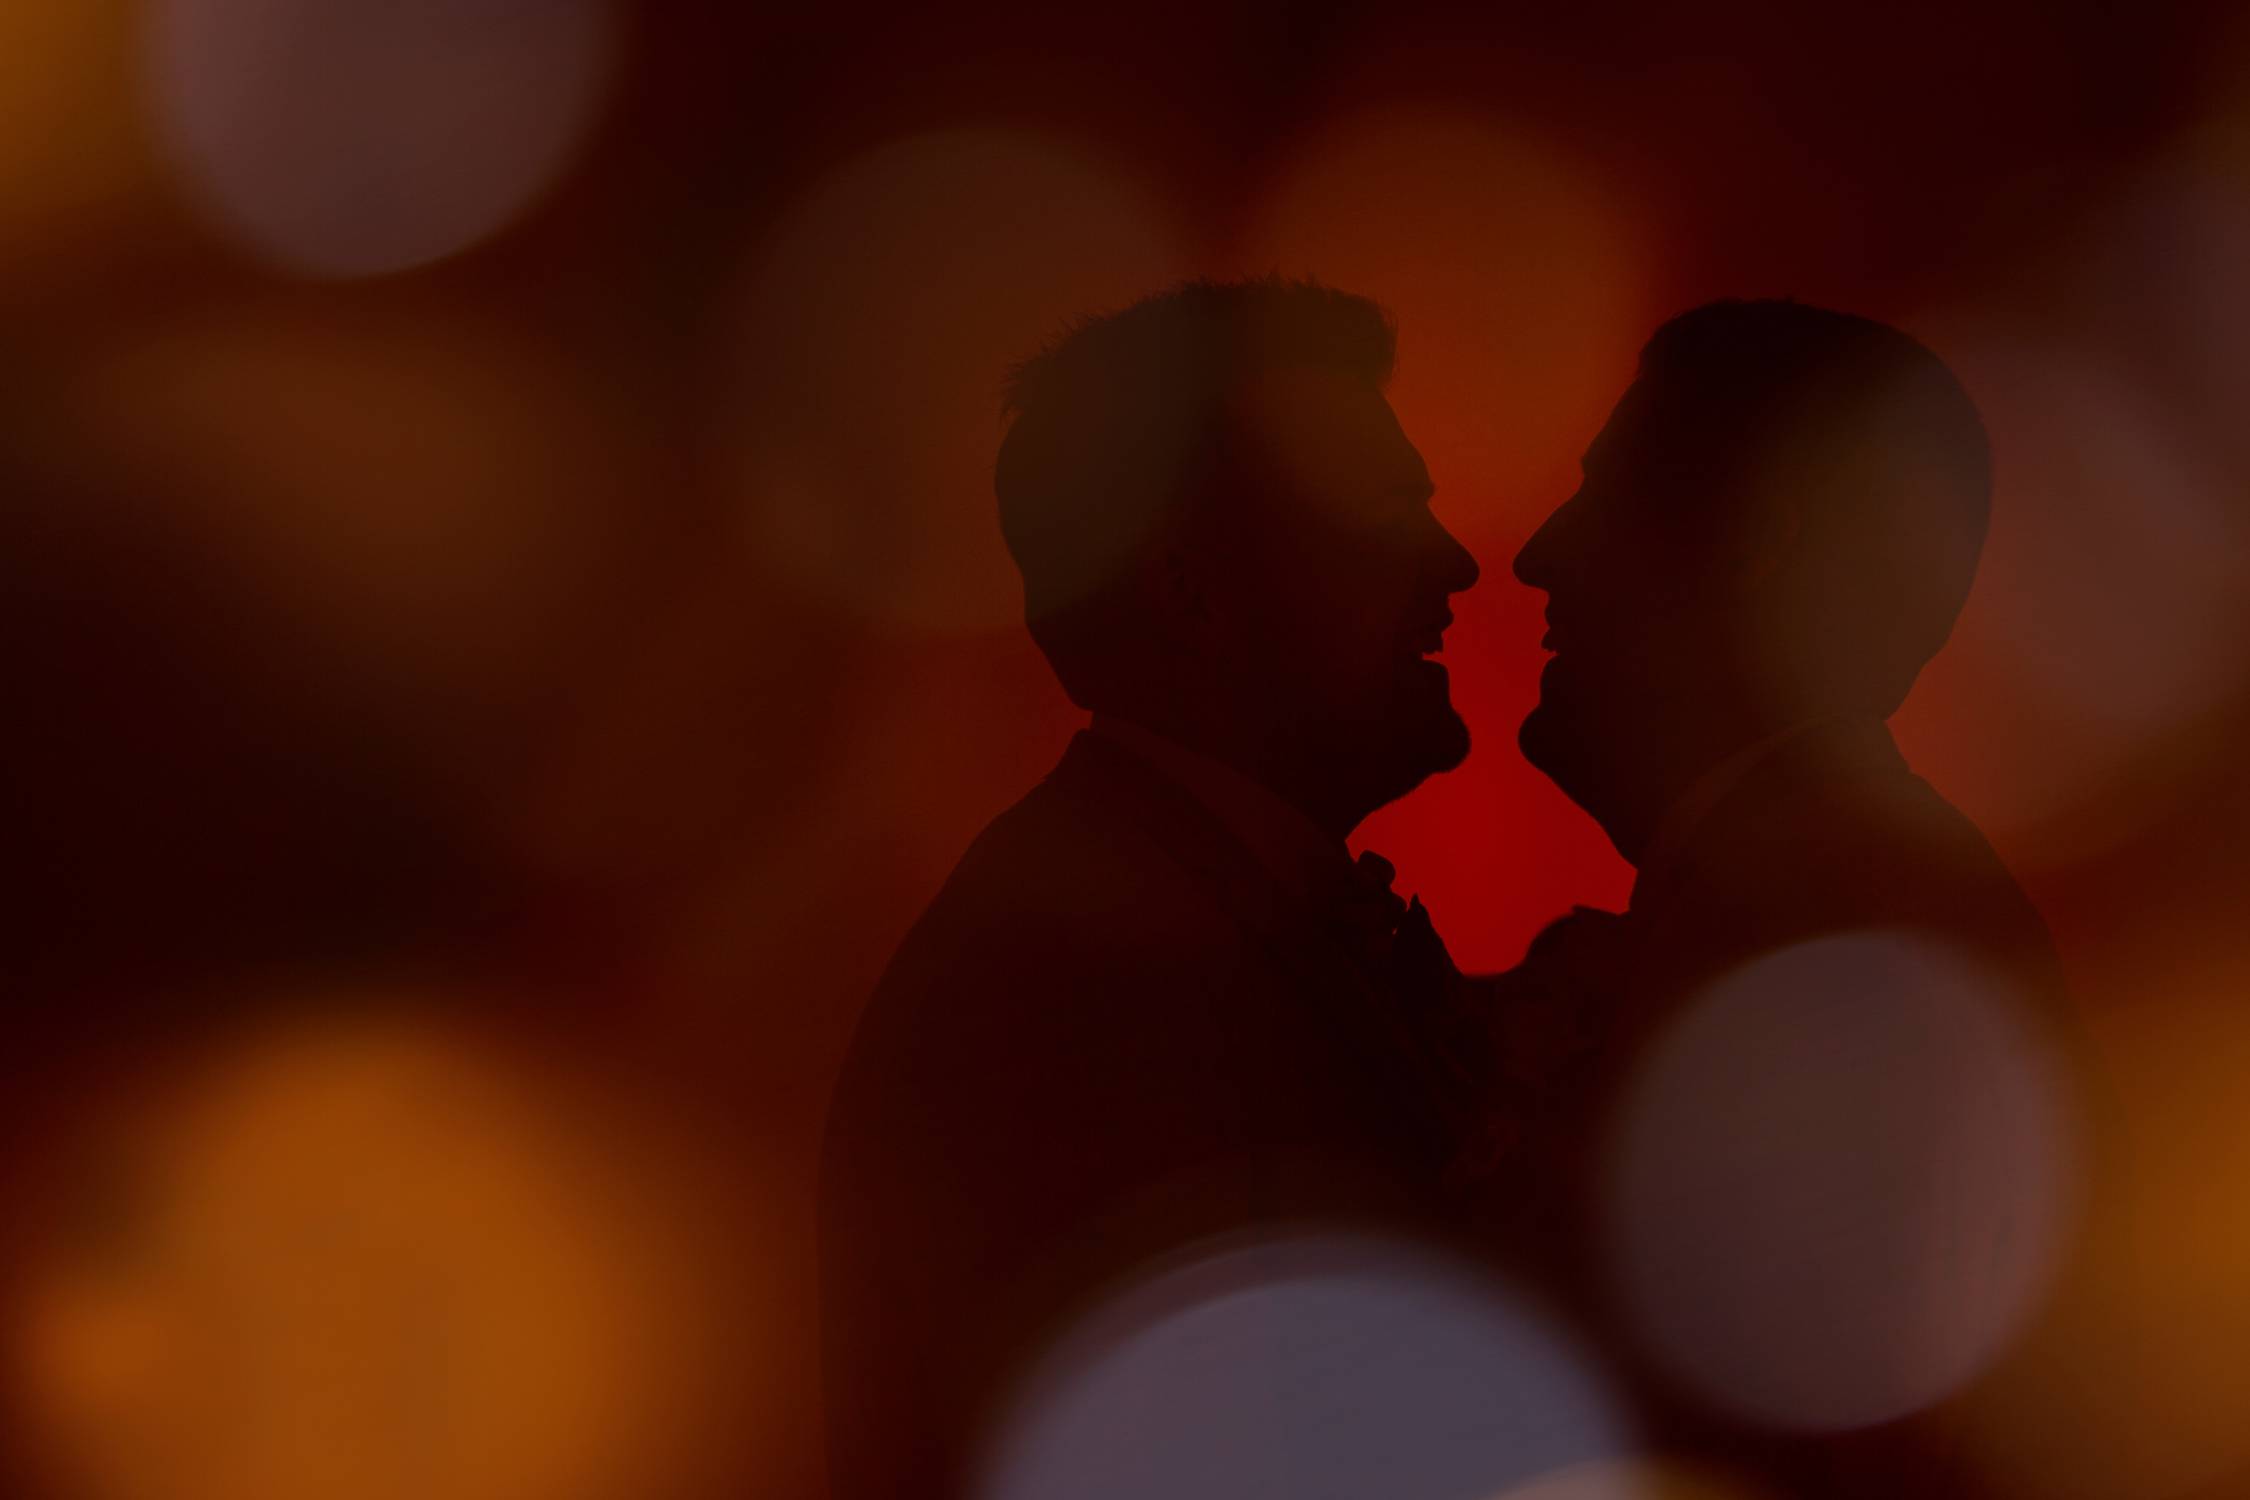 Silhouette of two men kissing in front of a red light, featuring Shaun & Chris.